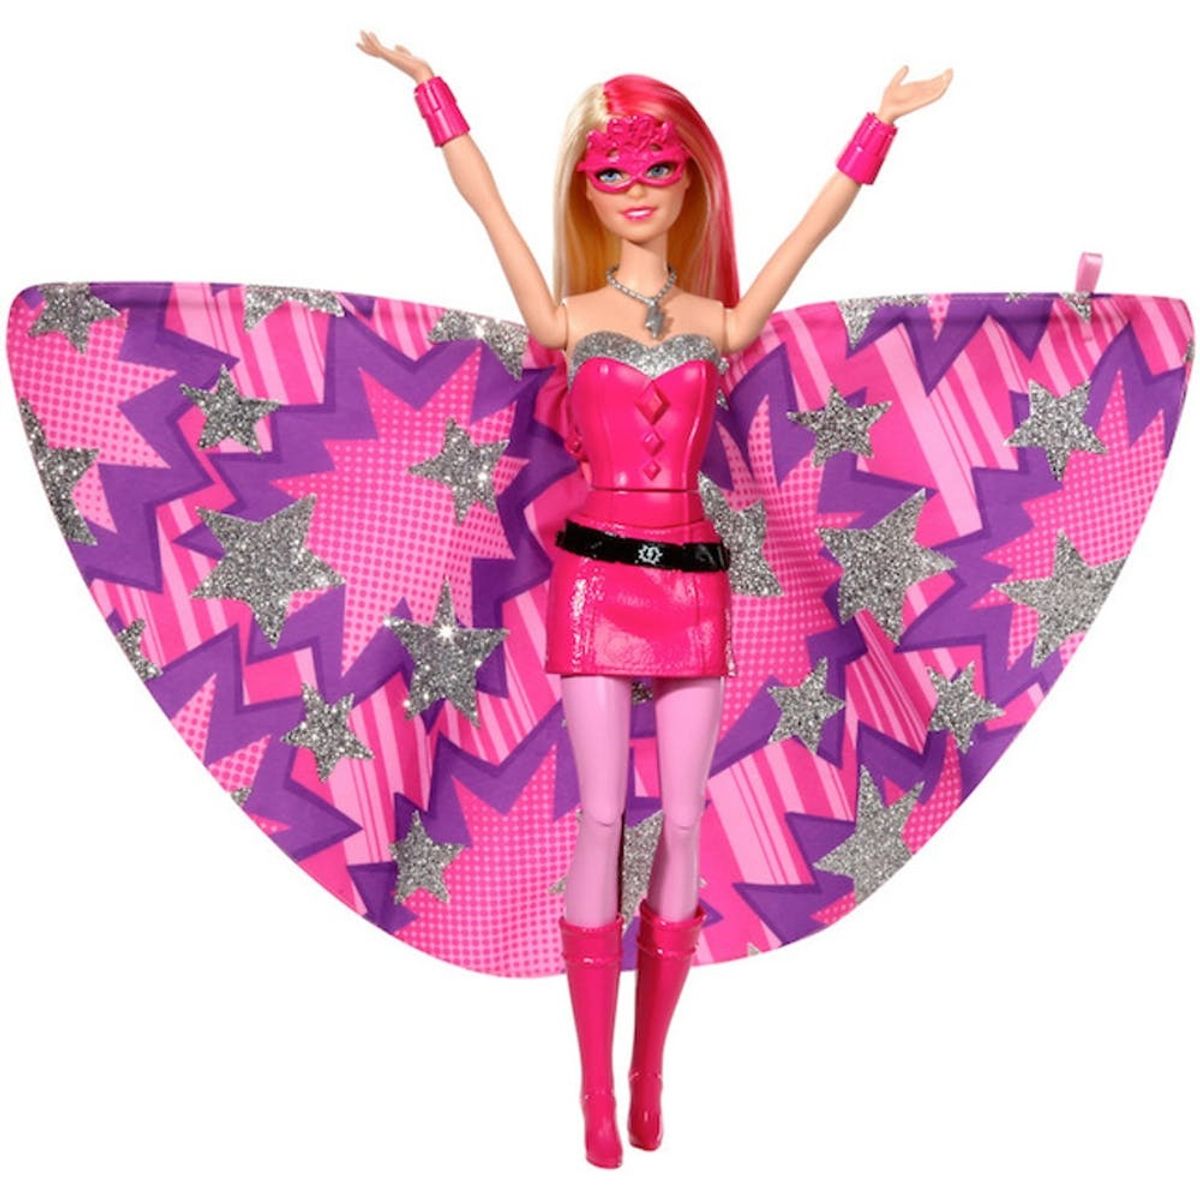 New Superhero Barbie Is Not Exactly Here to Save the Day